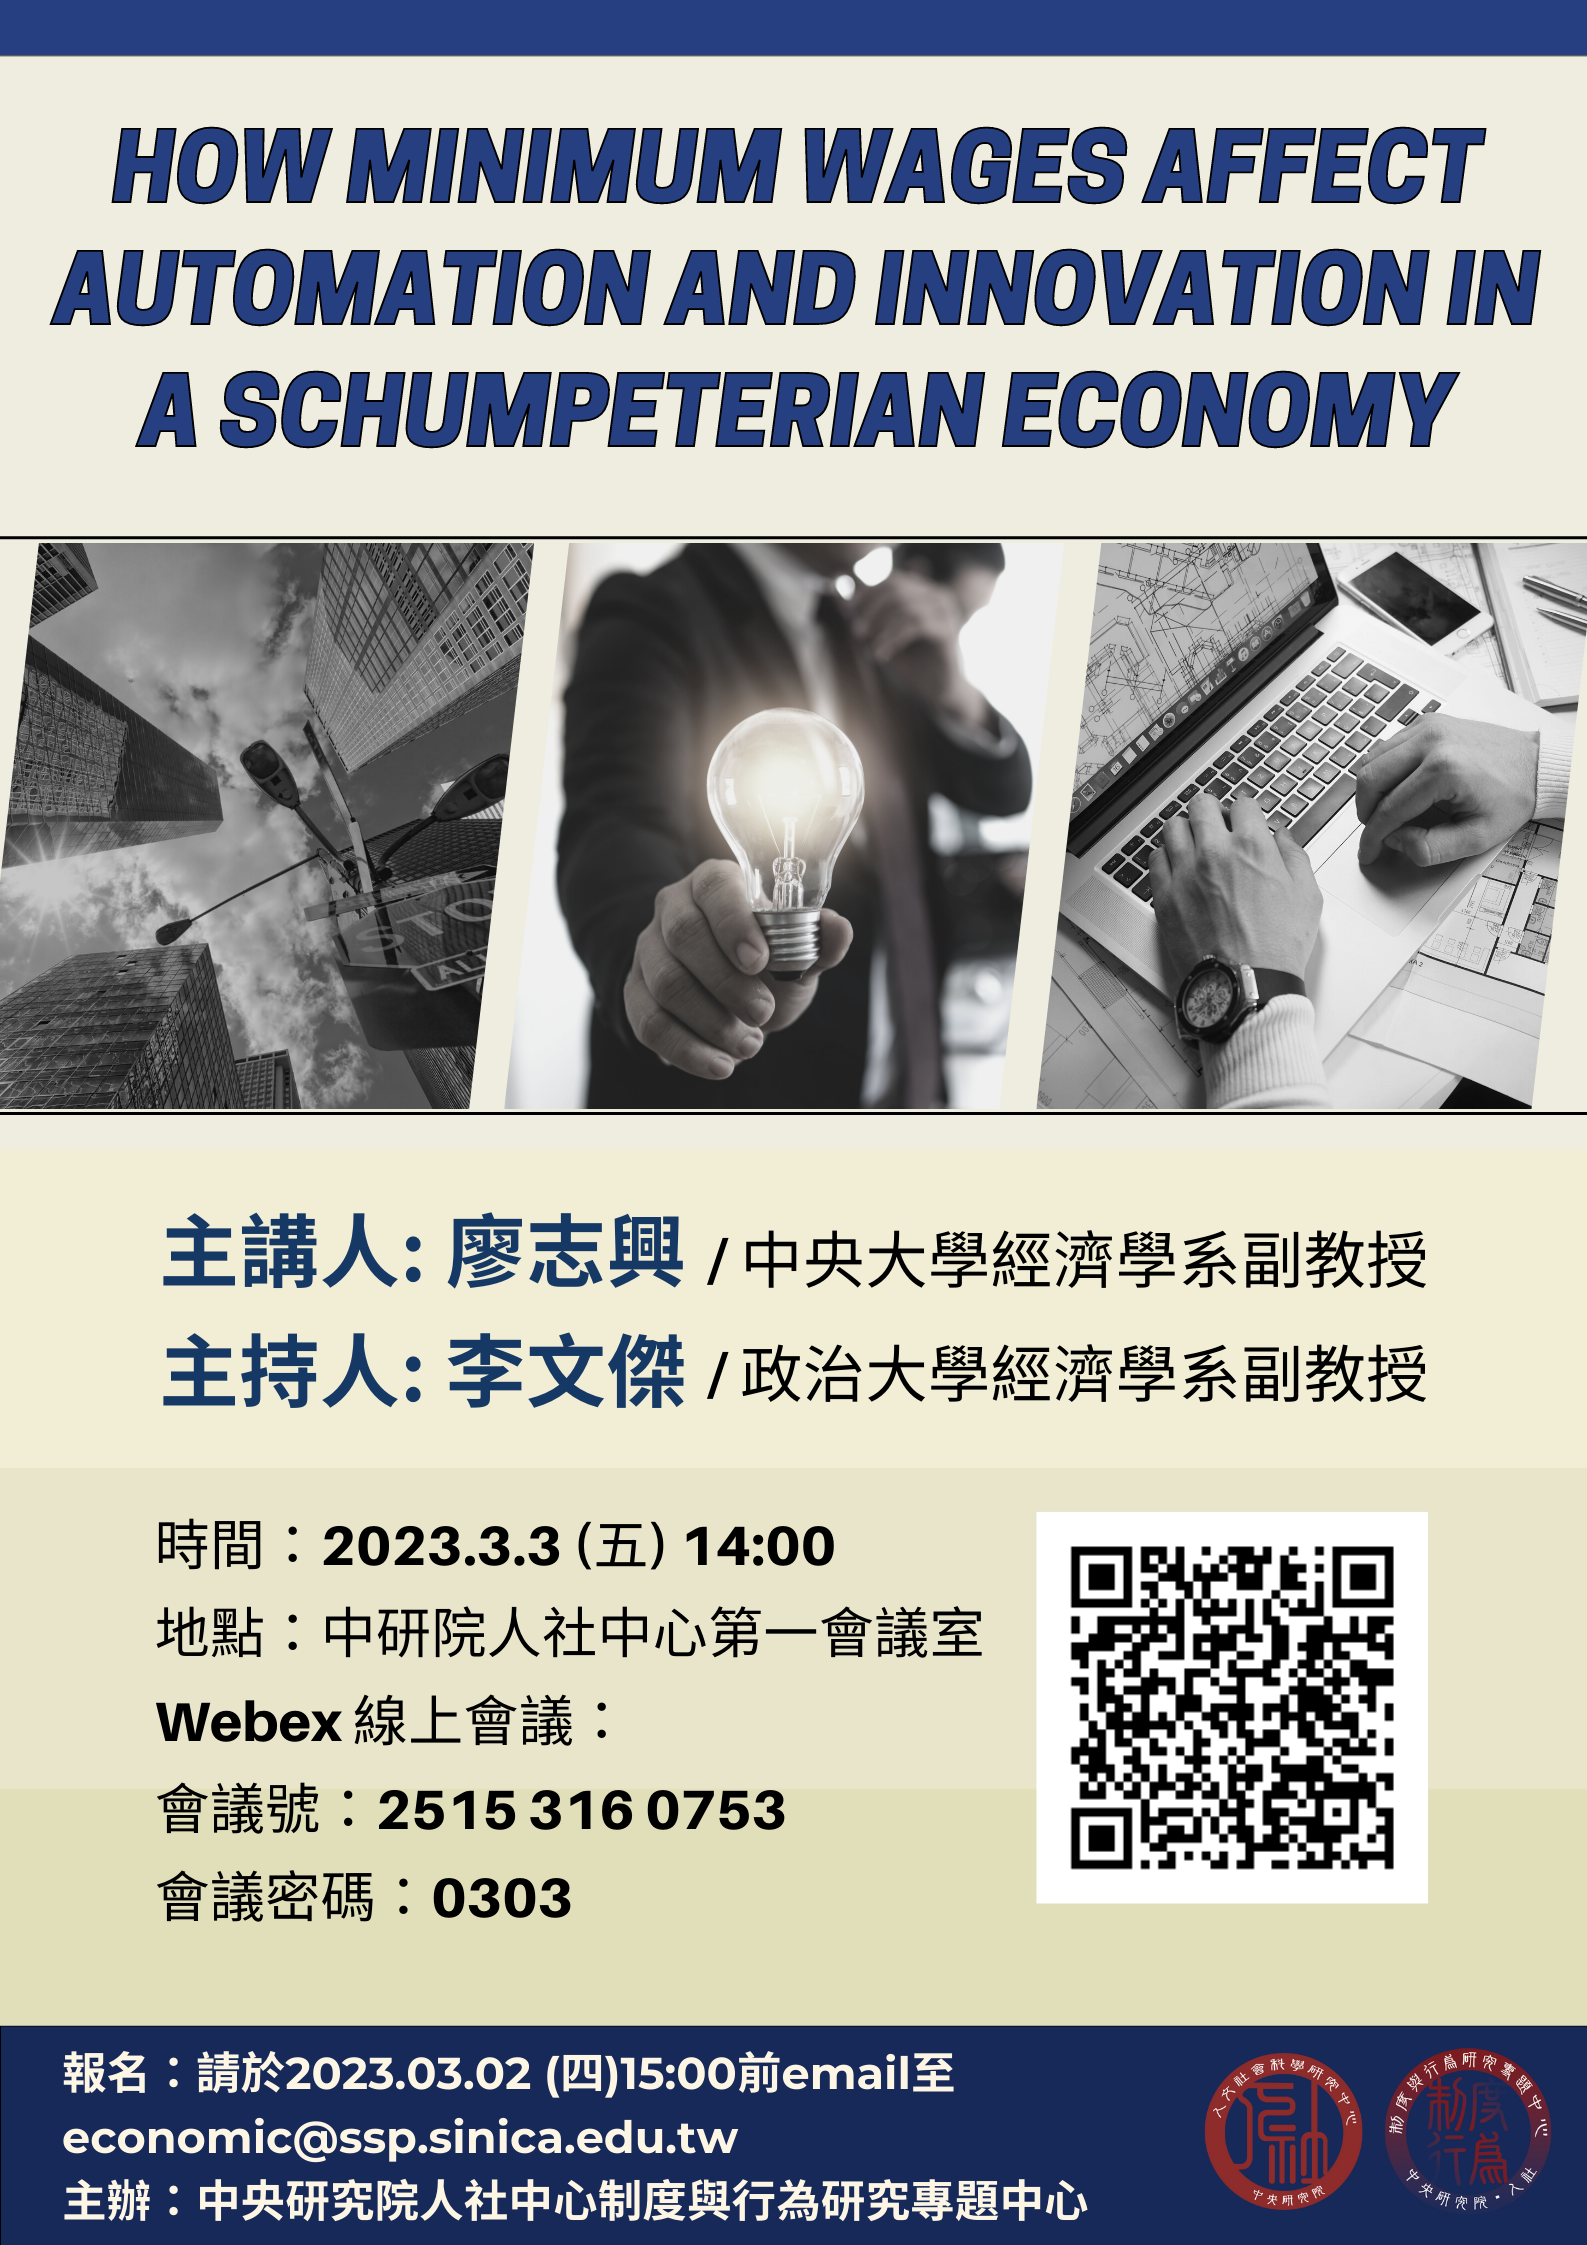 *How Minimum Wages Affect Automation and Innovation in a Schumpeterian Economy